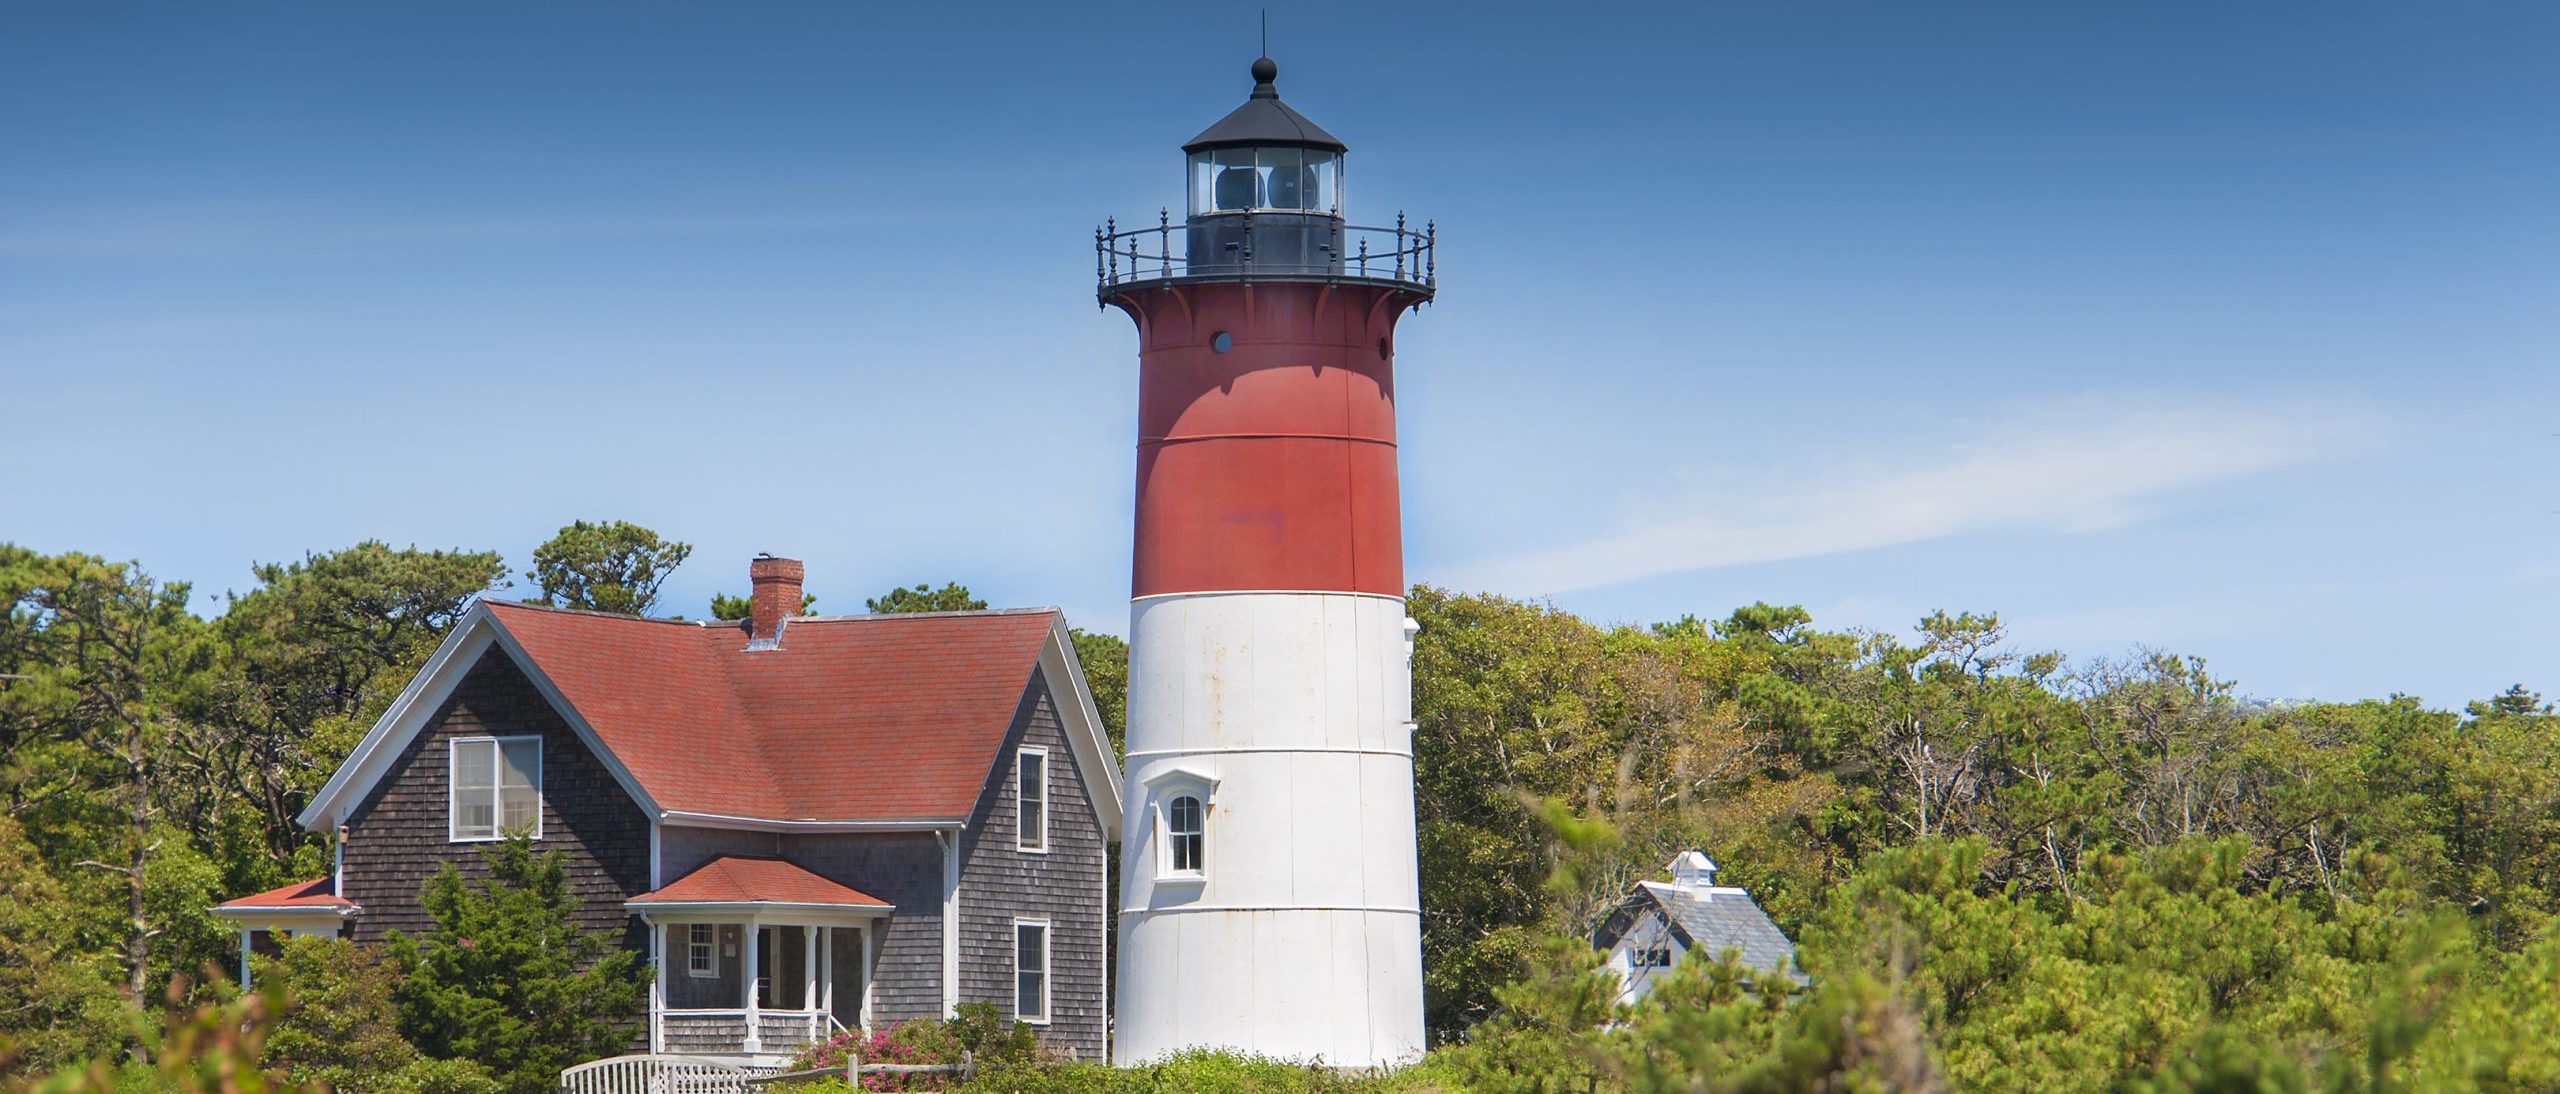 What should I do on a day trip to Cape Cod?